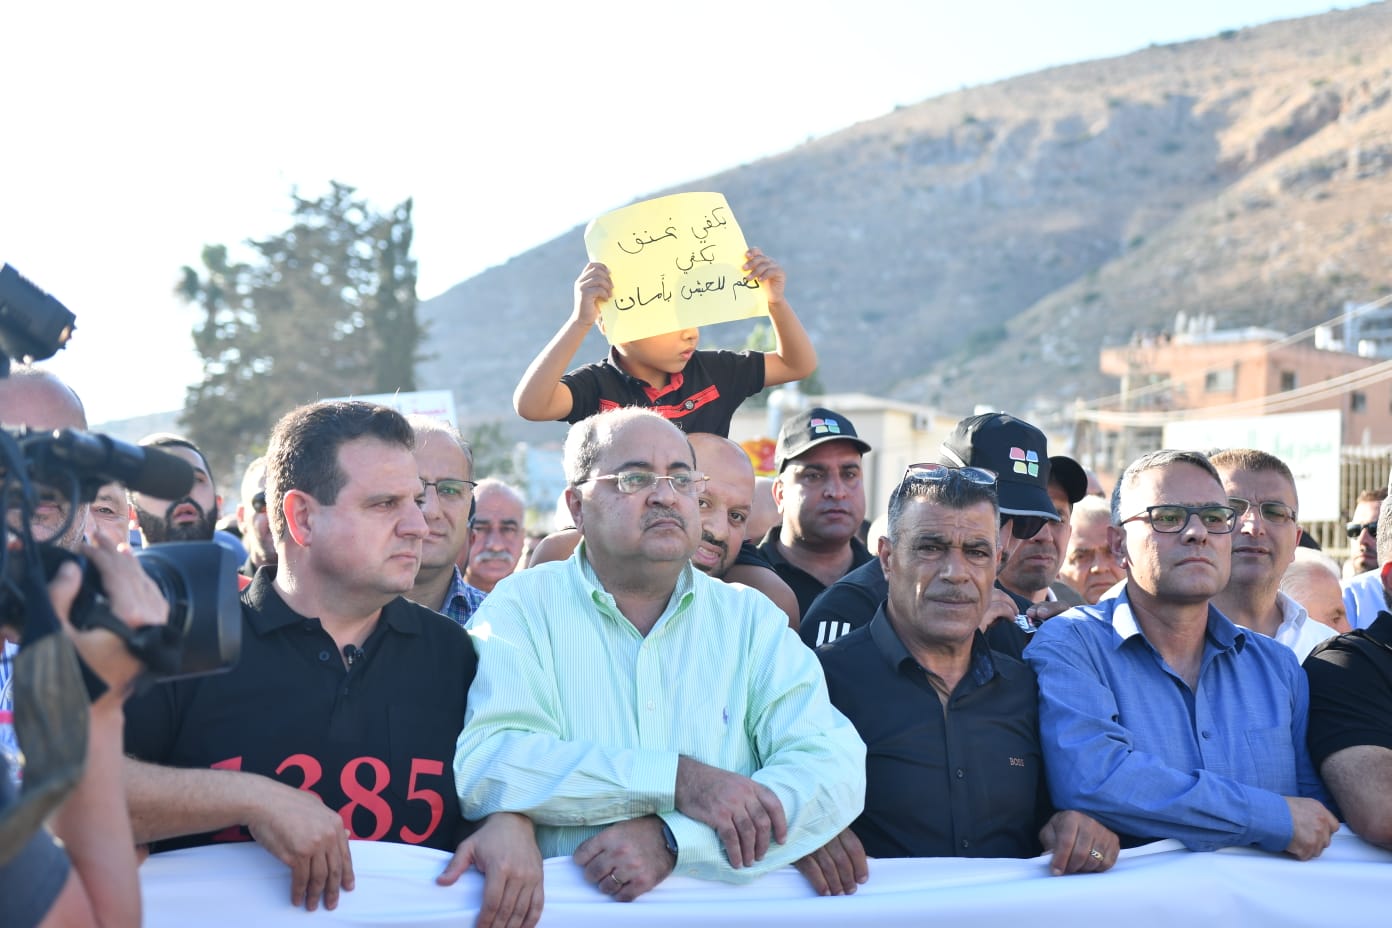 Joint List MP's Ayman Odeh and Ahmad Tibi (from left), protesting against violence in the Arab Israeli society, October 2019